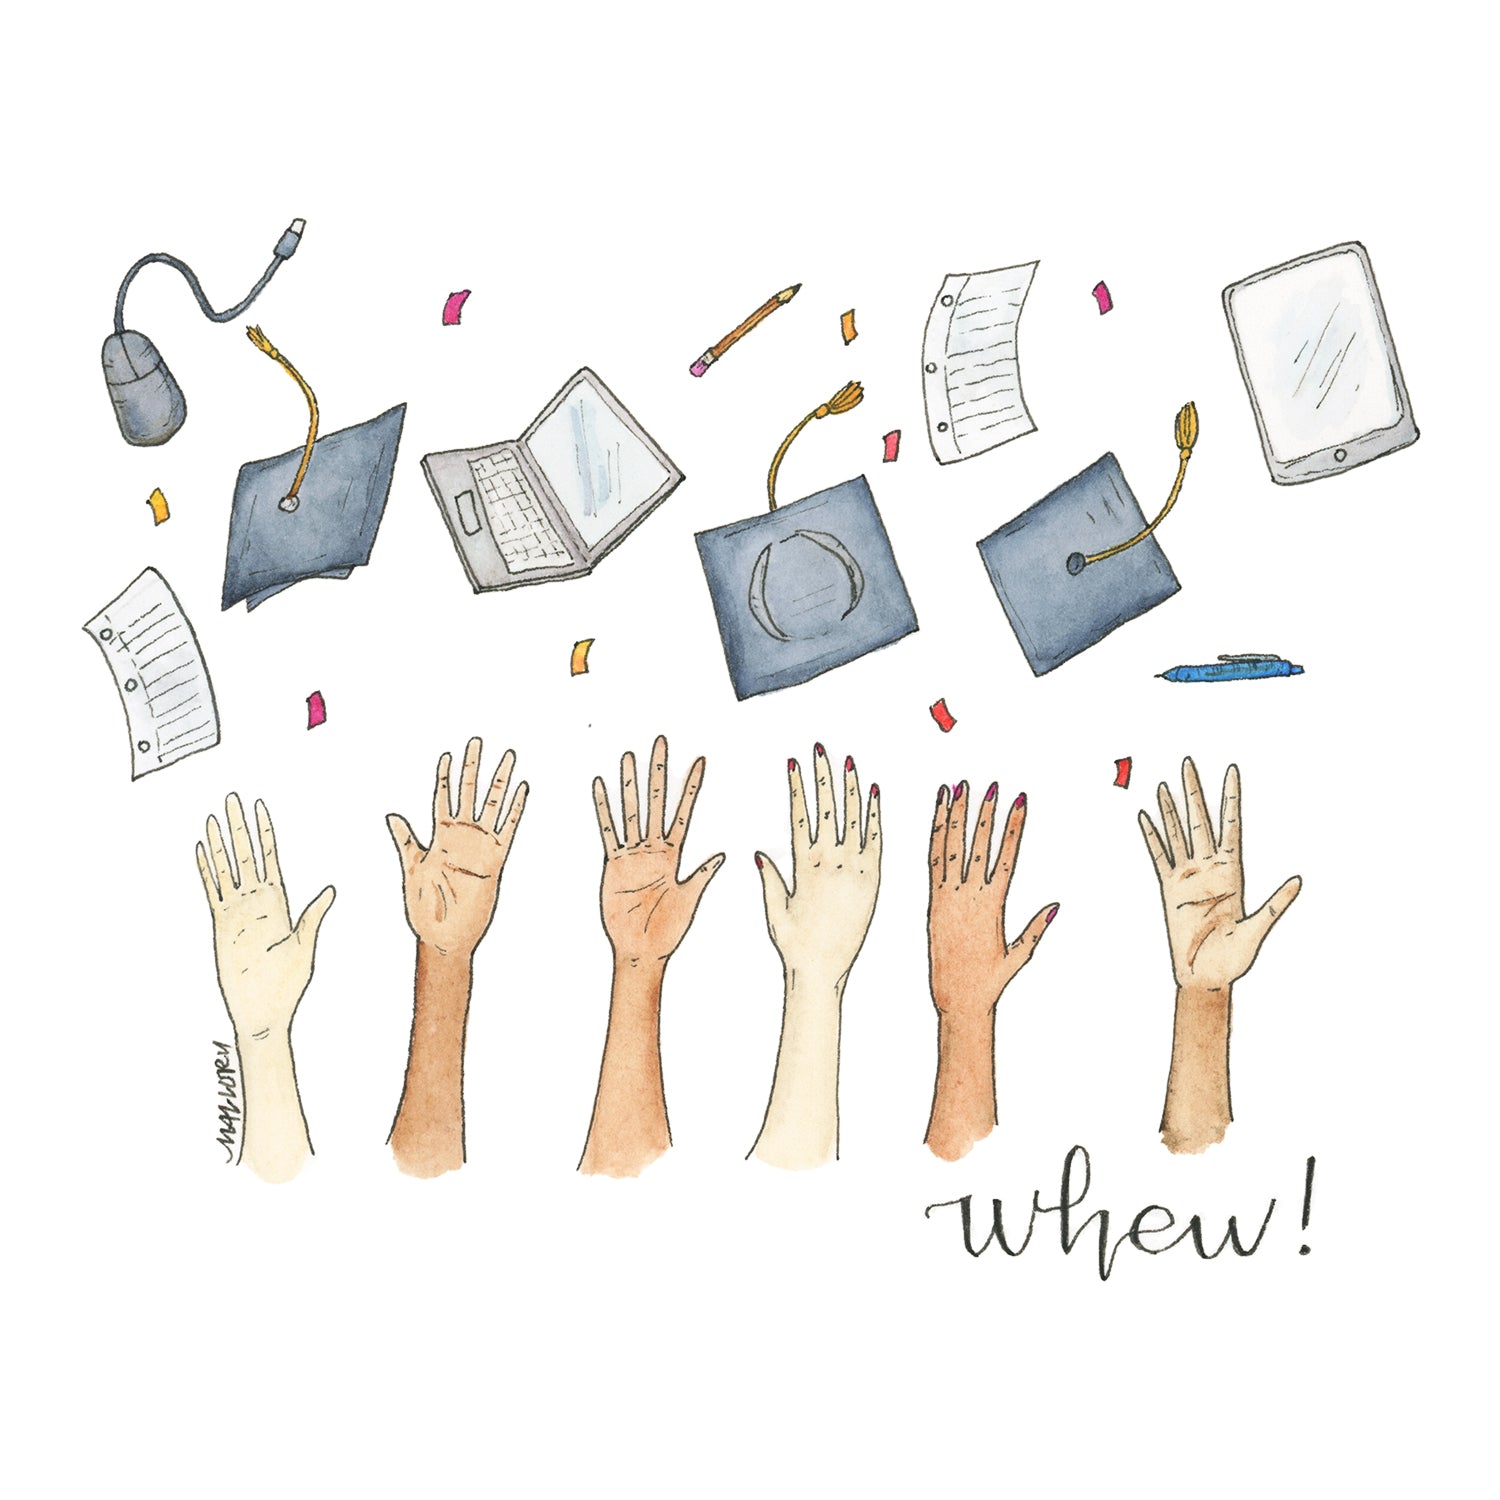 Image depicts a graduation card that shows hands throwing school supplies and graduation caps into the air. Objects being thrown in celebration are pens, papers, computers and confetti.